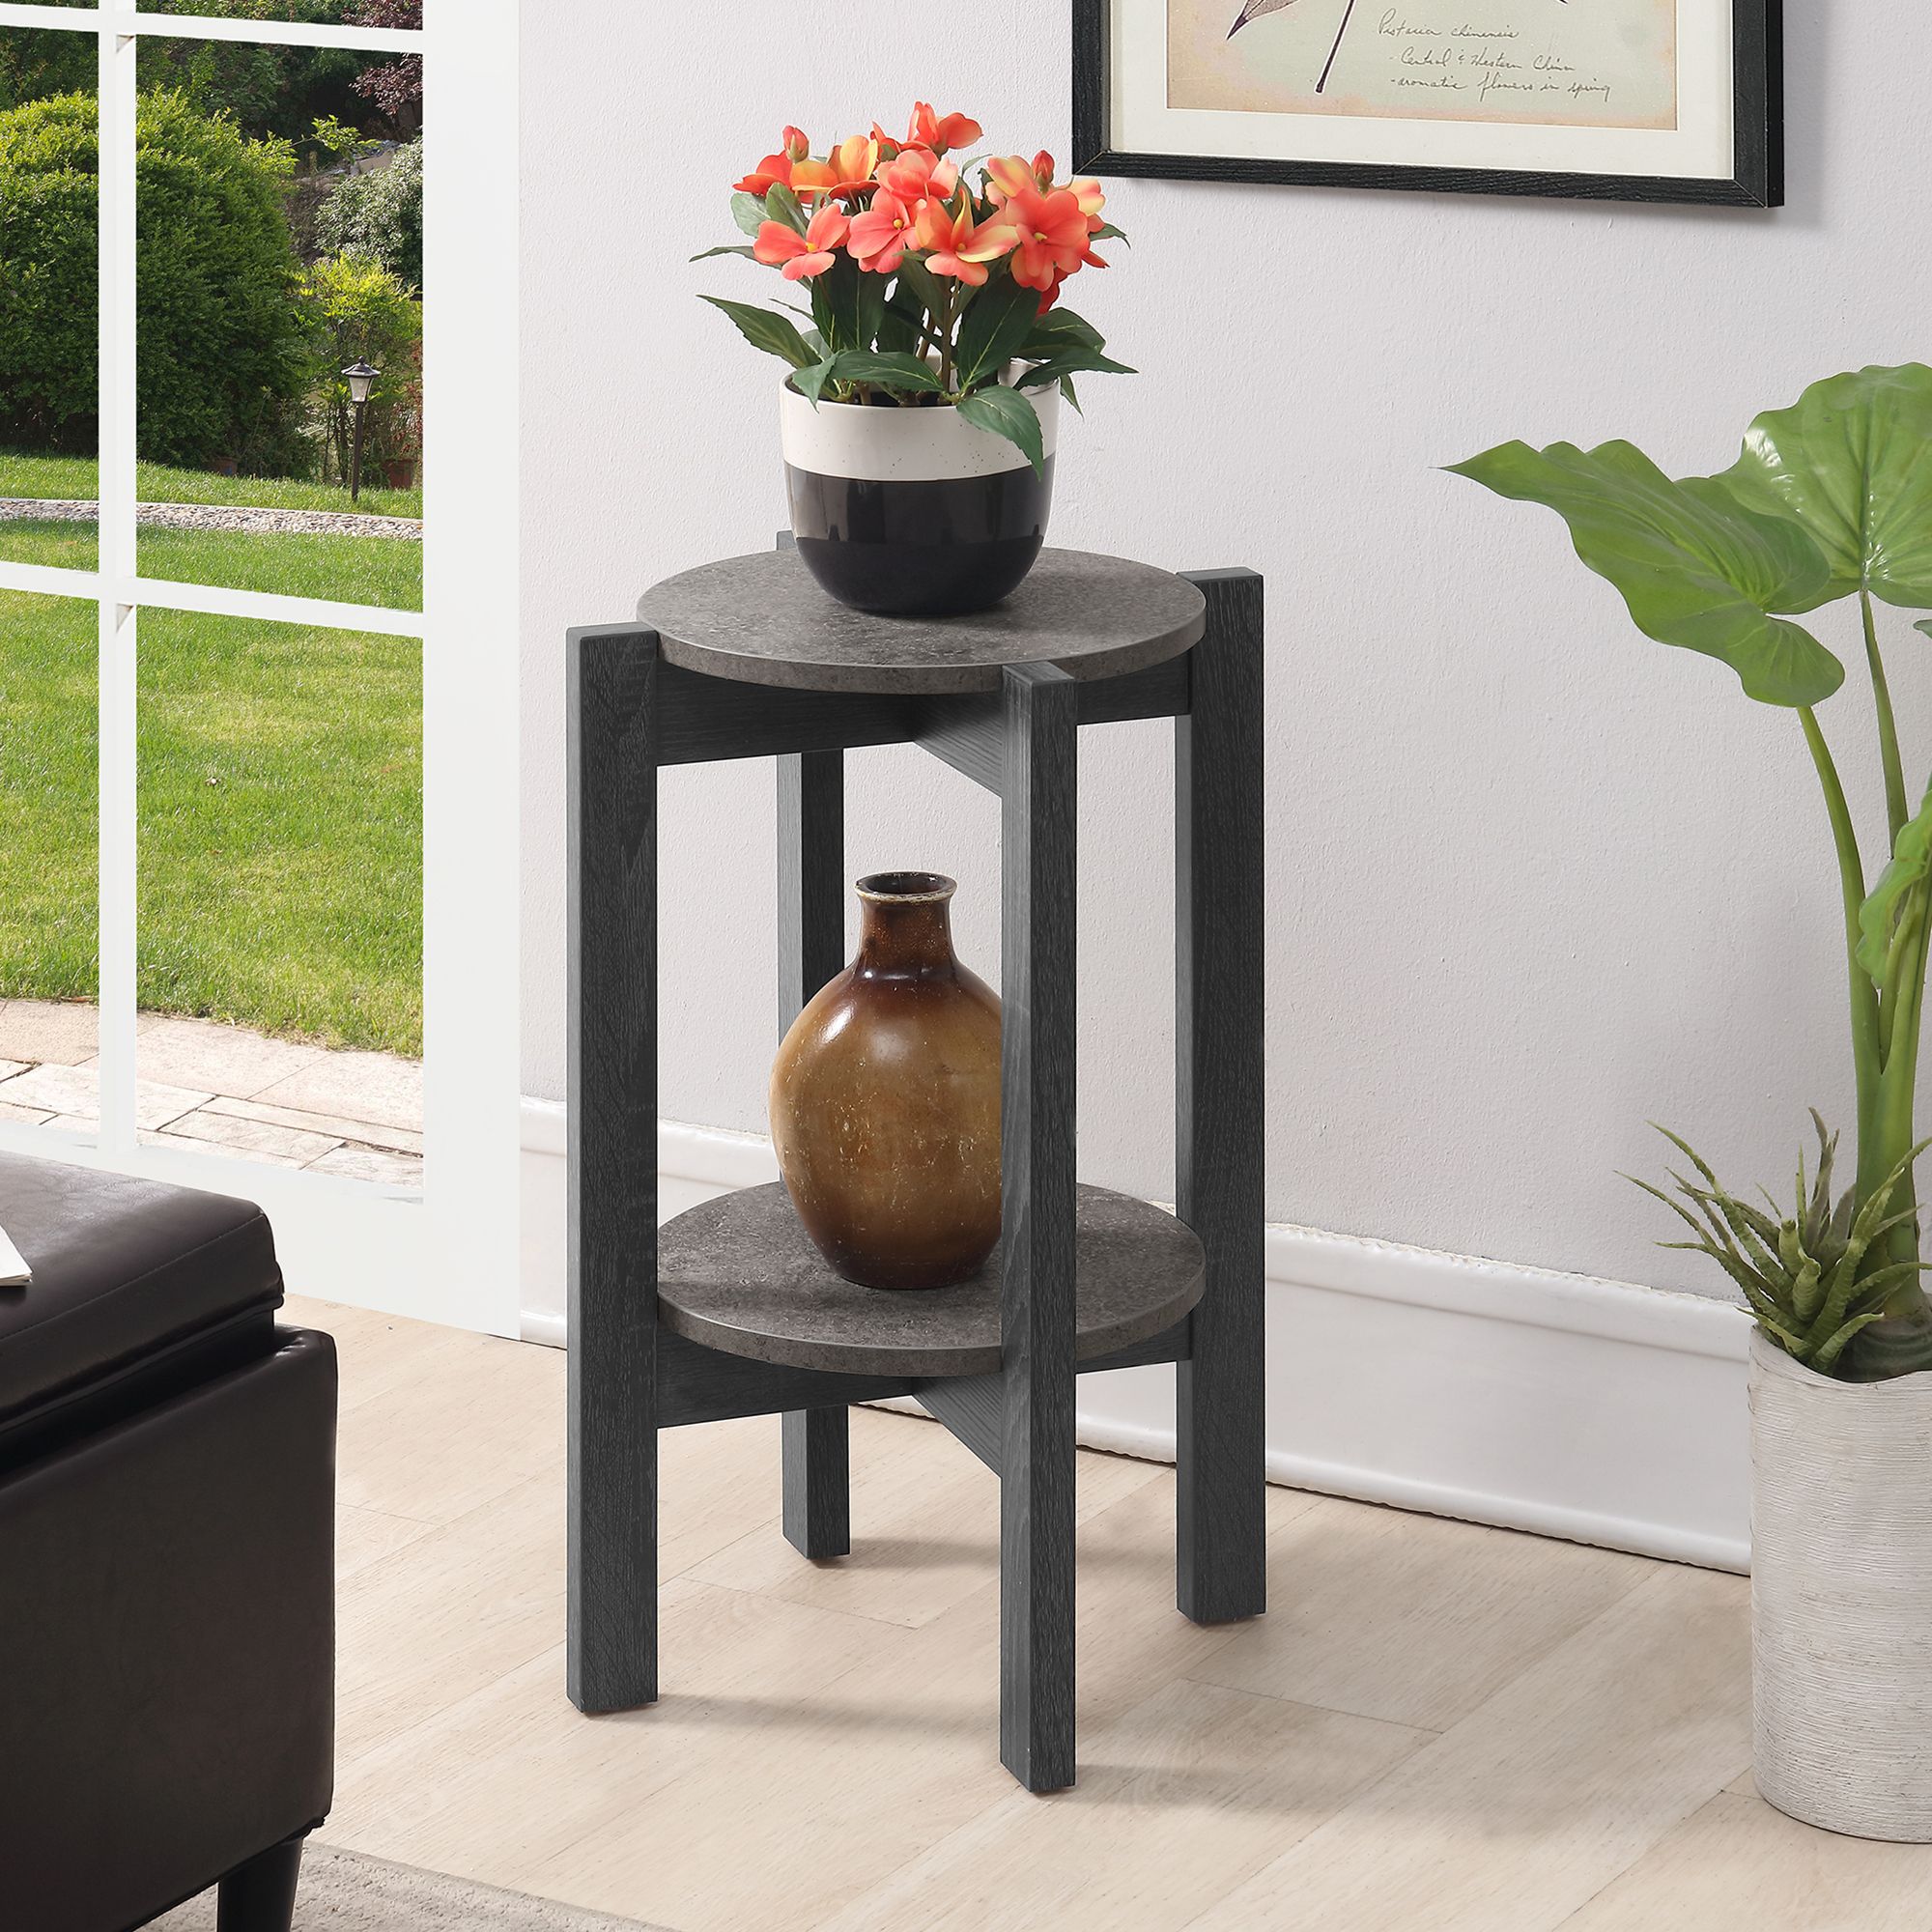 Weathered Gray Plant Stands Intended For Best And Newest Newport Medium 2 Tier Plant Stand, Faux Cement/weathered Gray – Walmart (View 7 of 15)